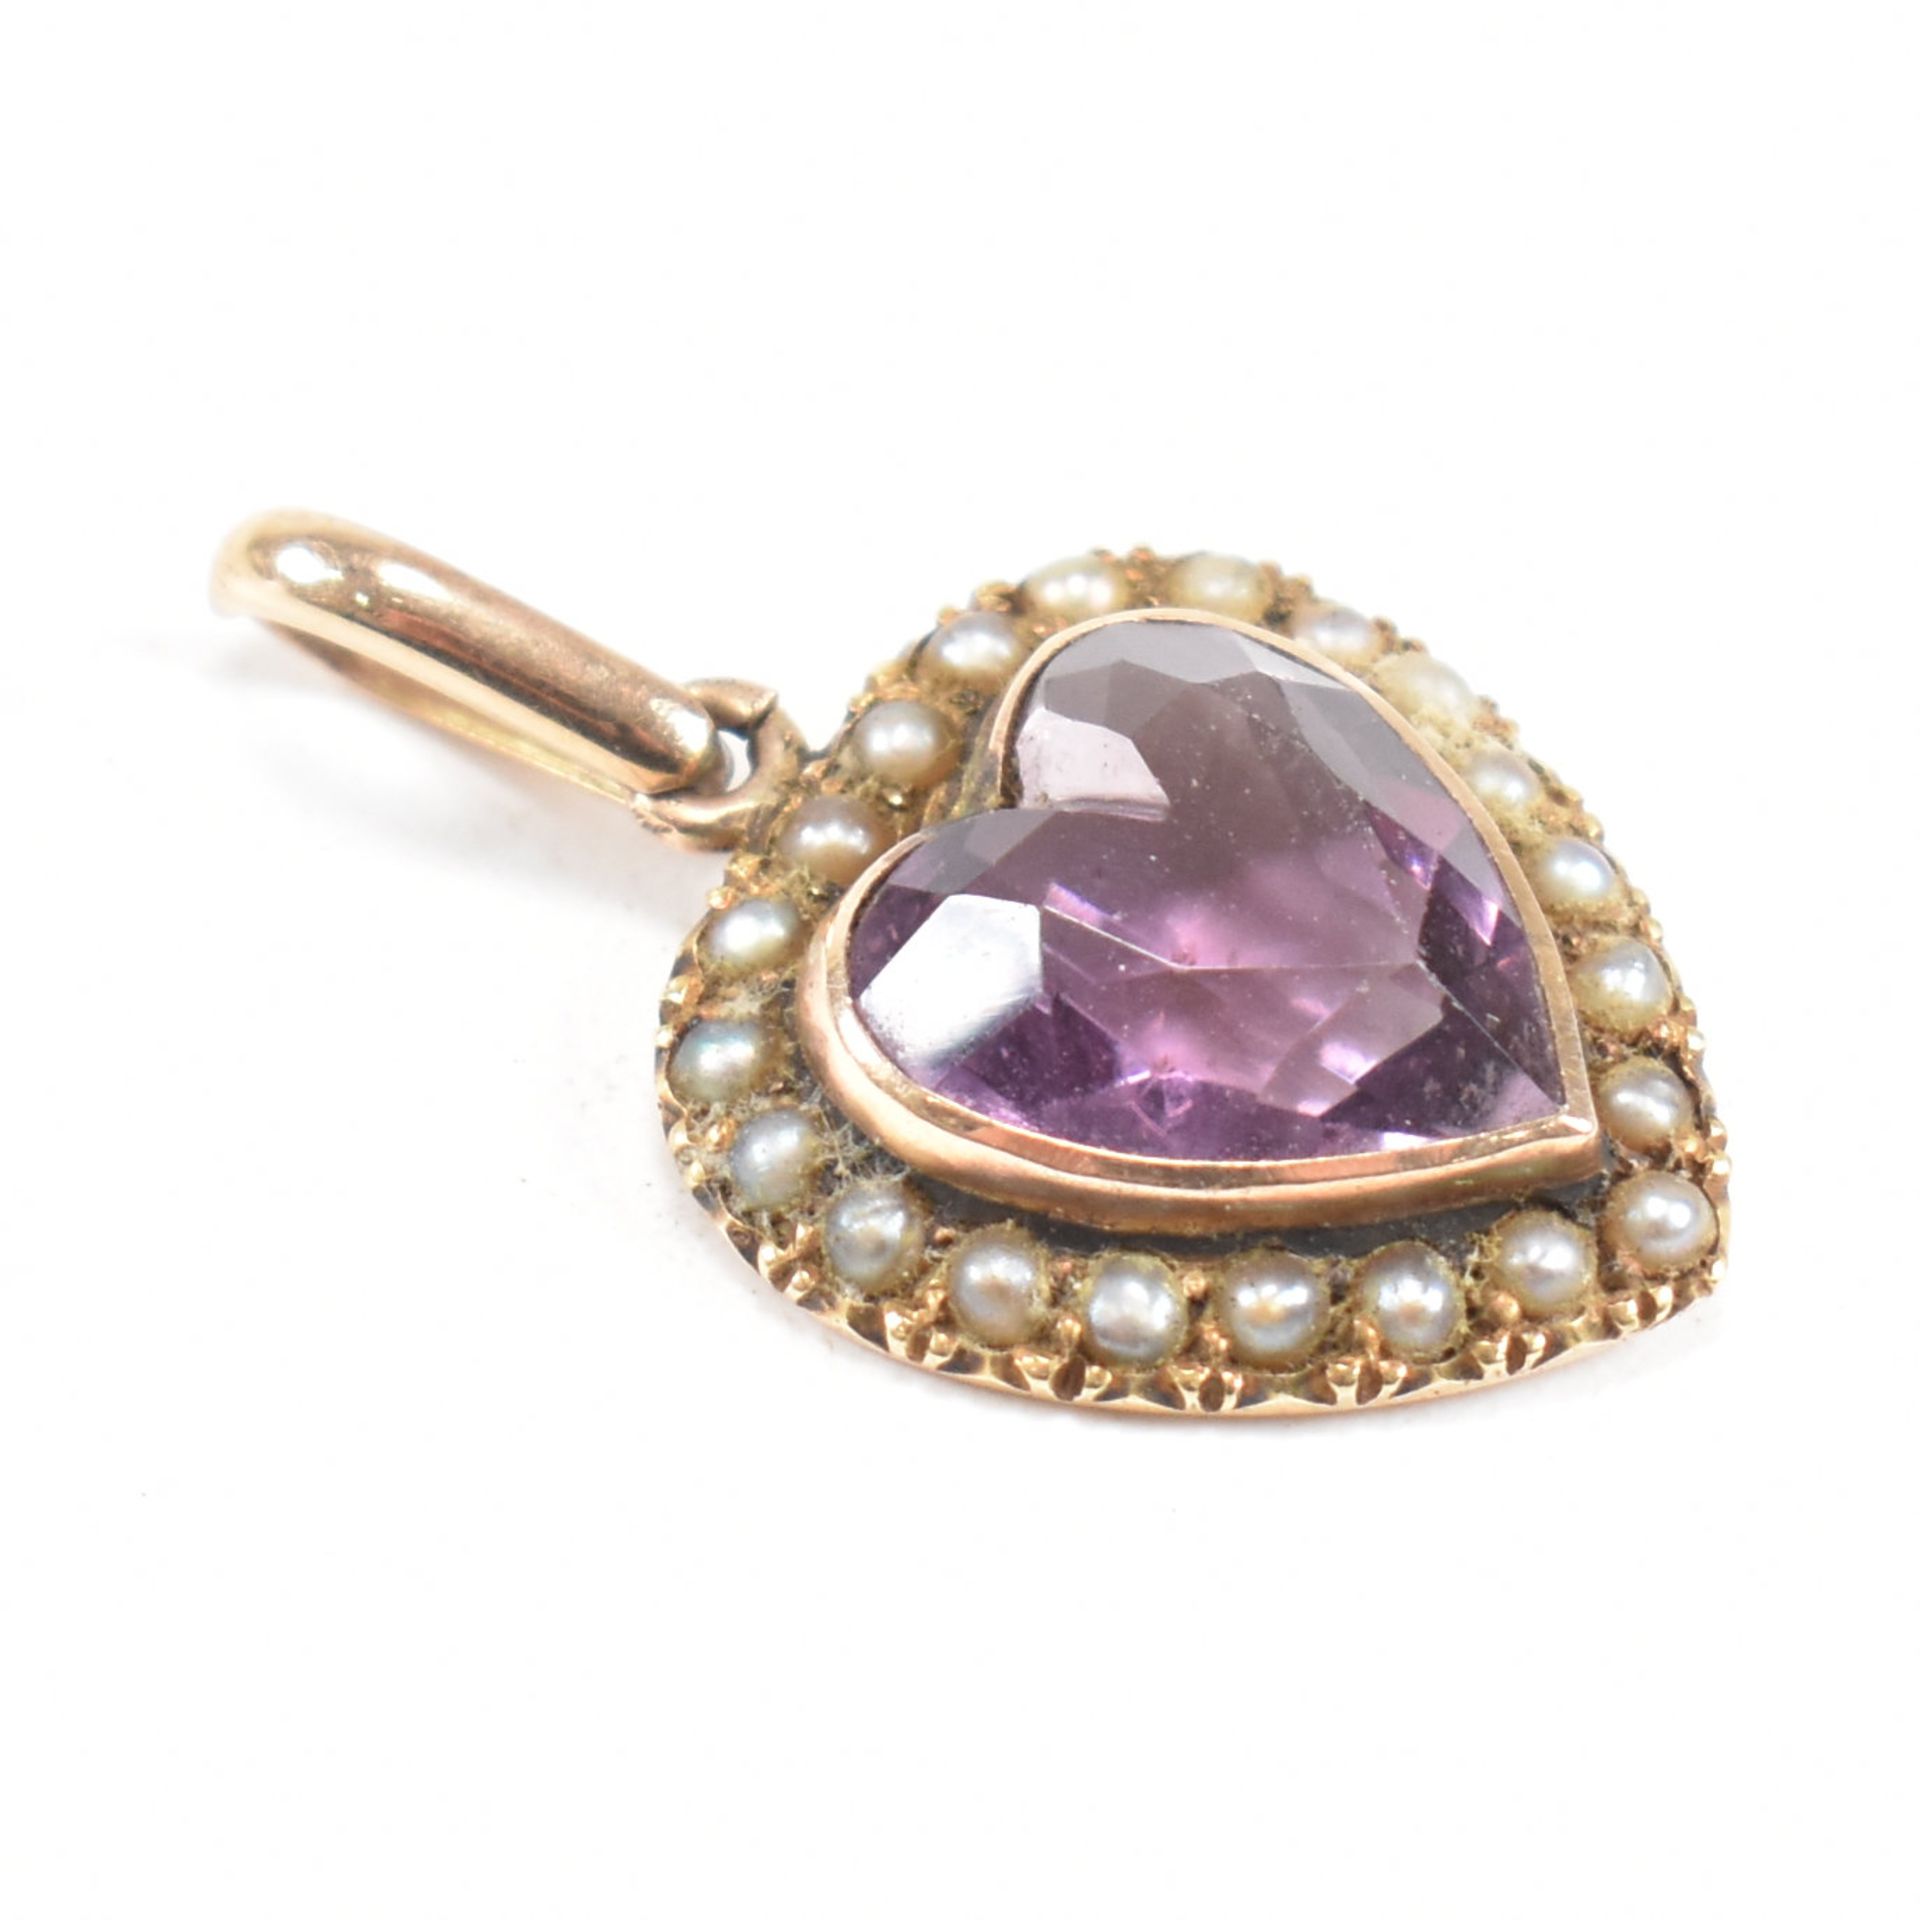 19TH CENTURY GOLD AMETHYST & PEARL HEART NECKLACE PENDANT - Image 4 of 5